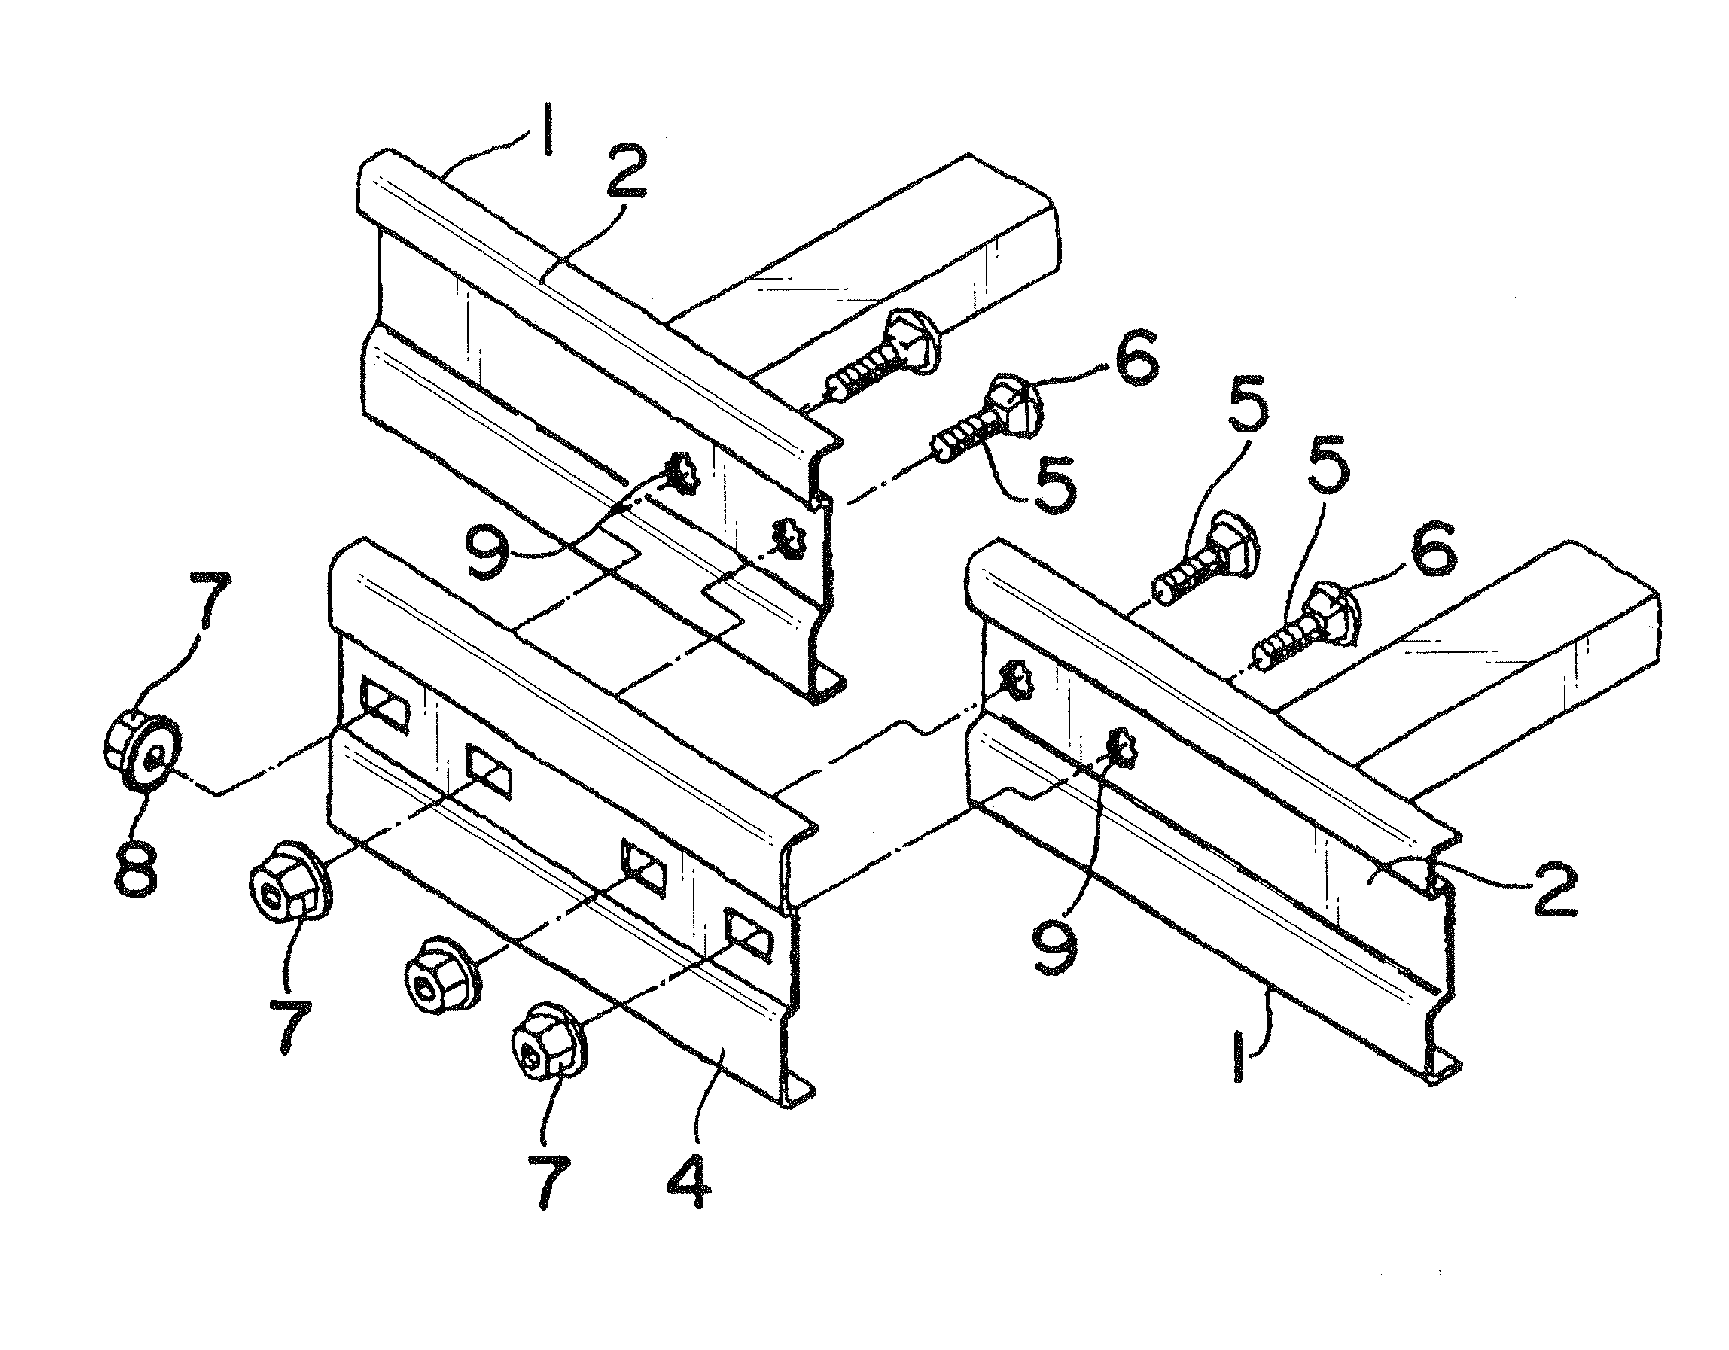 Joint structure of cable racks